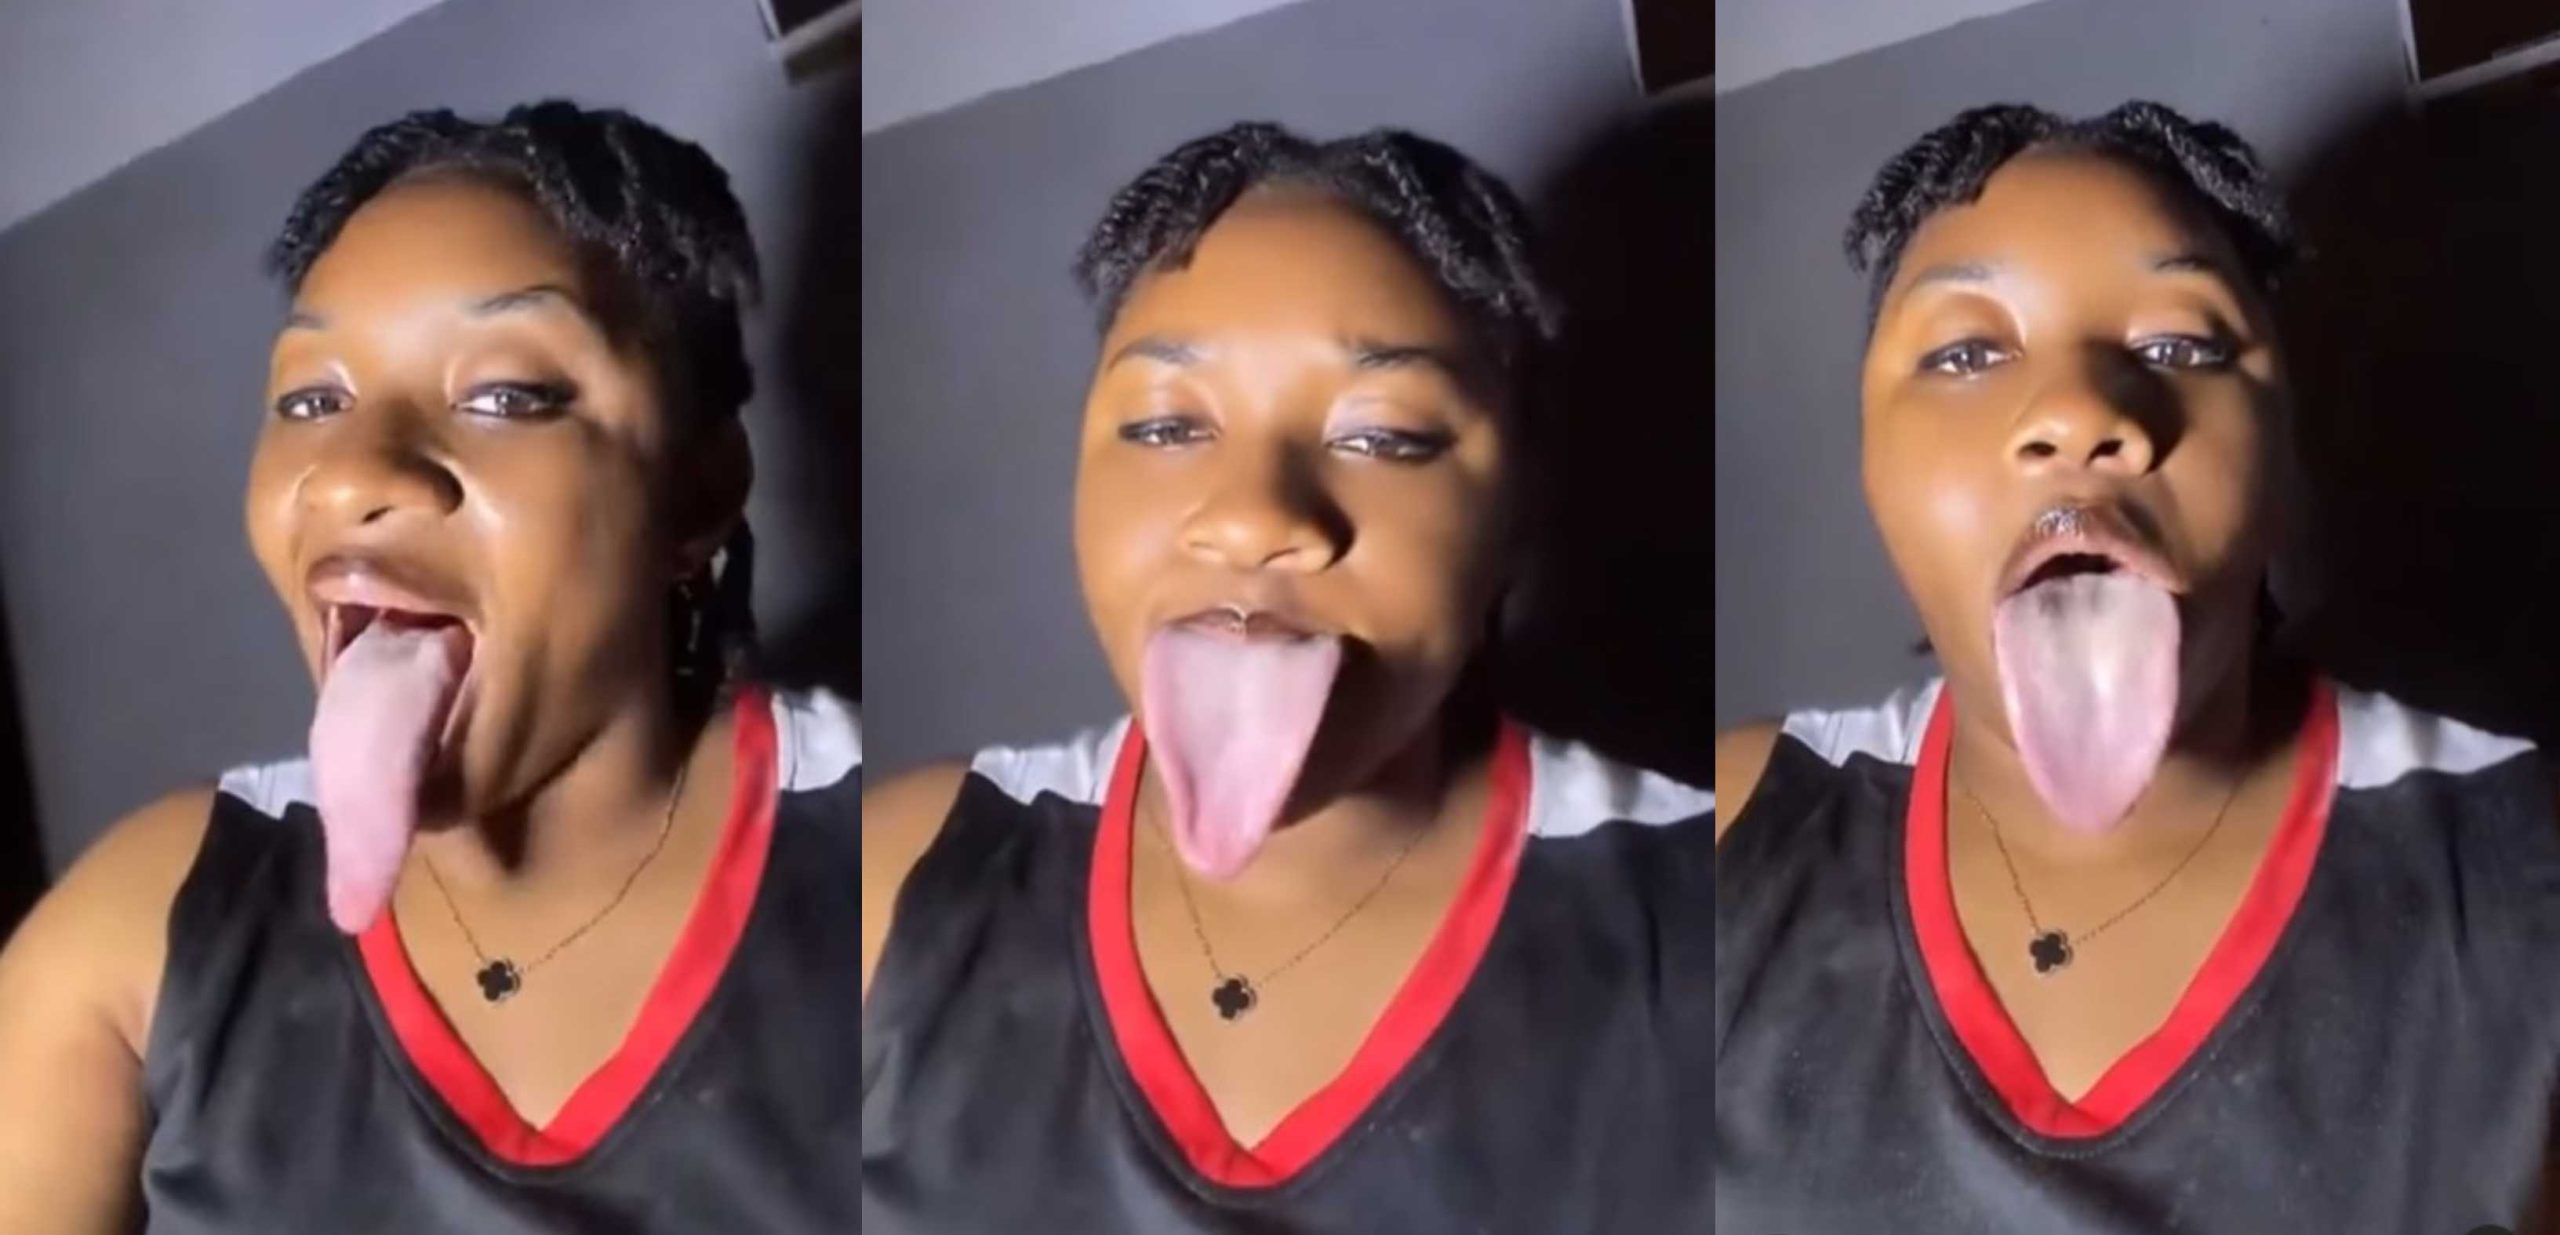 Nigerian lady sparks reactions online as she shows off her very long tongue